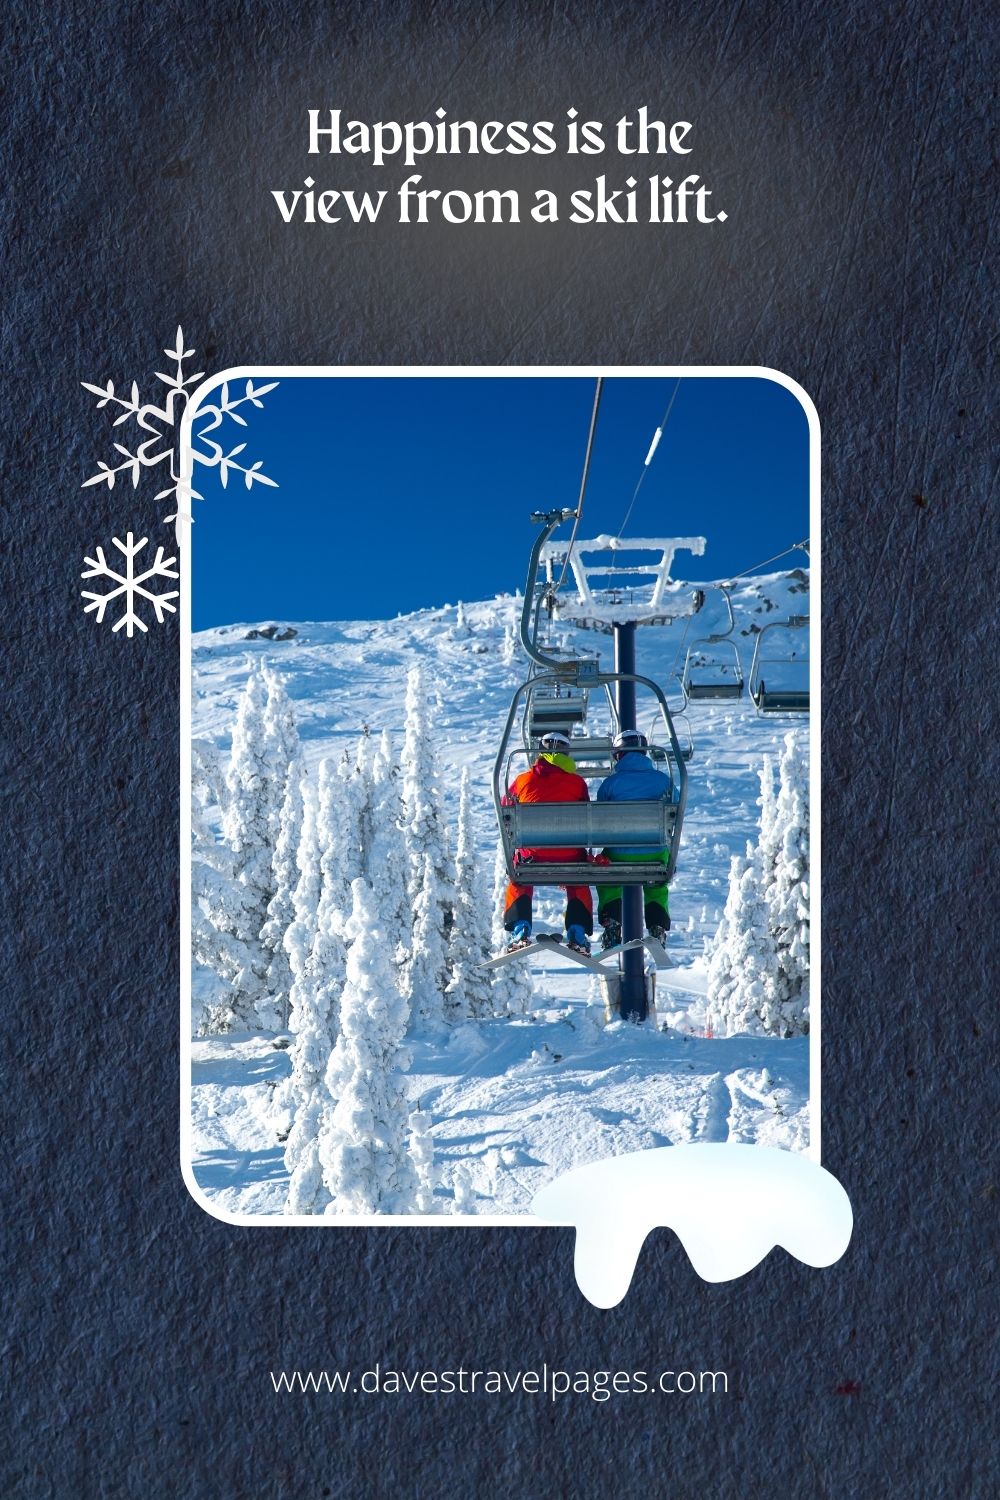 Happiness is the view from a ski lift